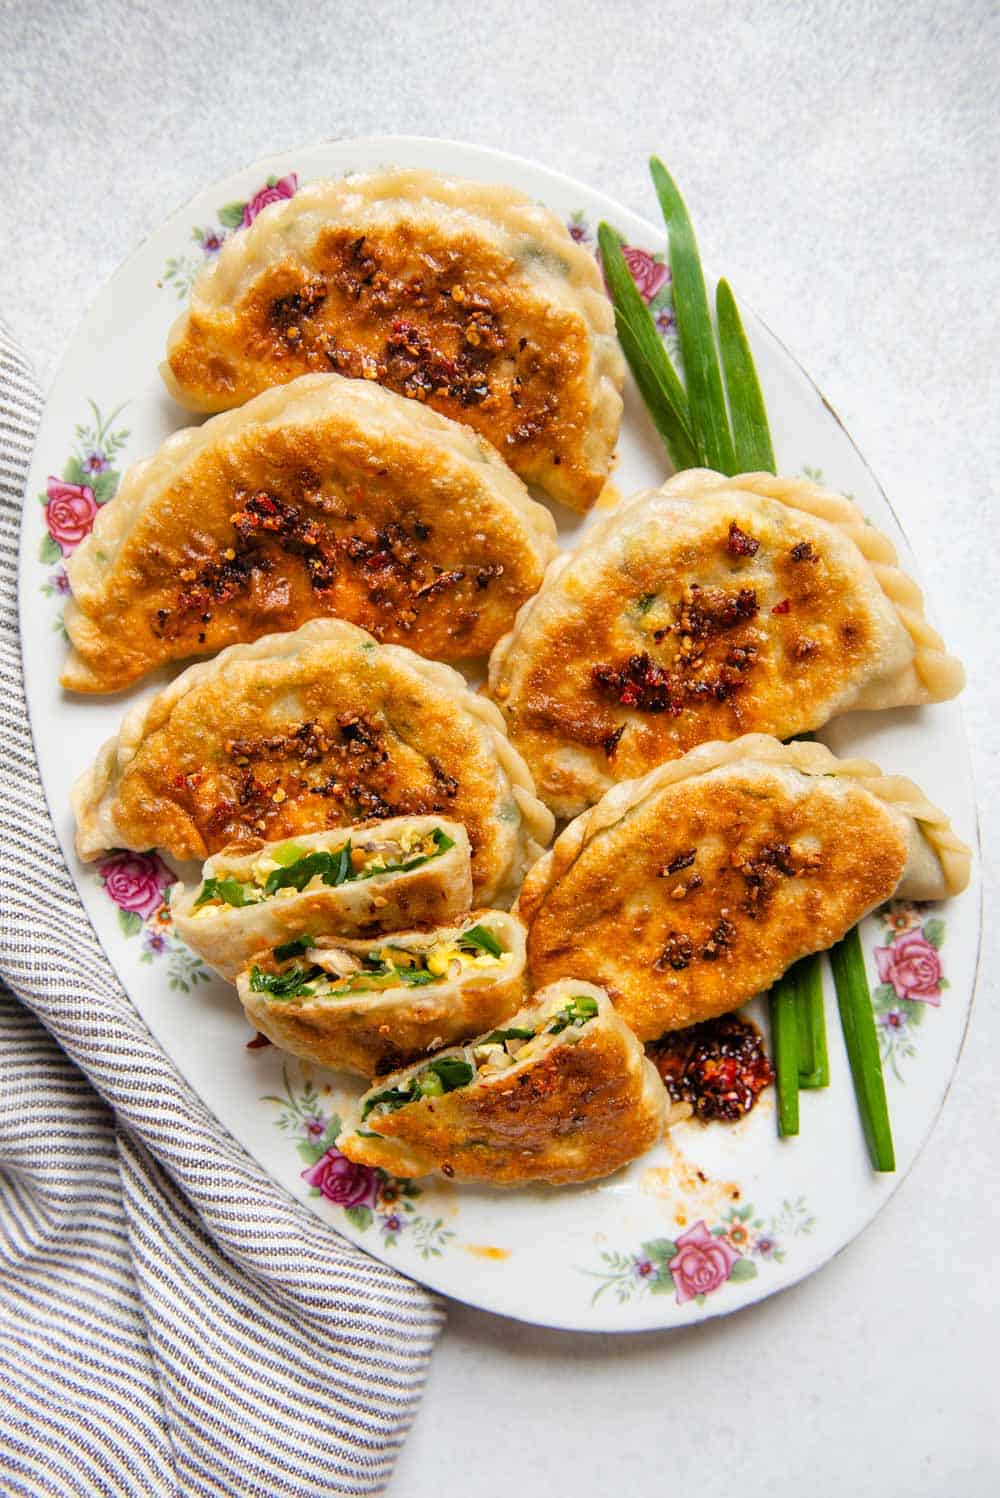 Chinese Chive Boxes Recipe